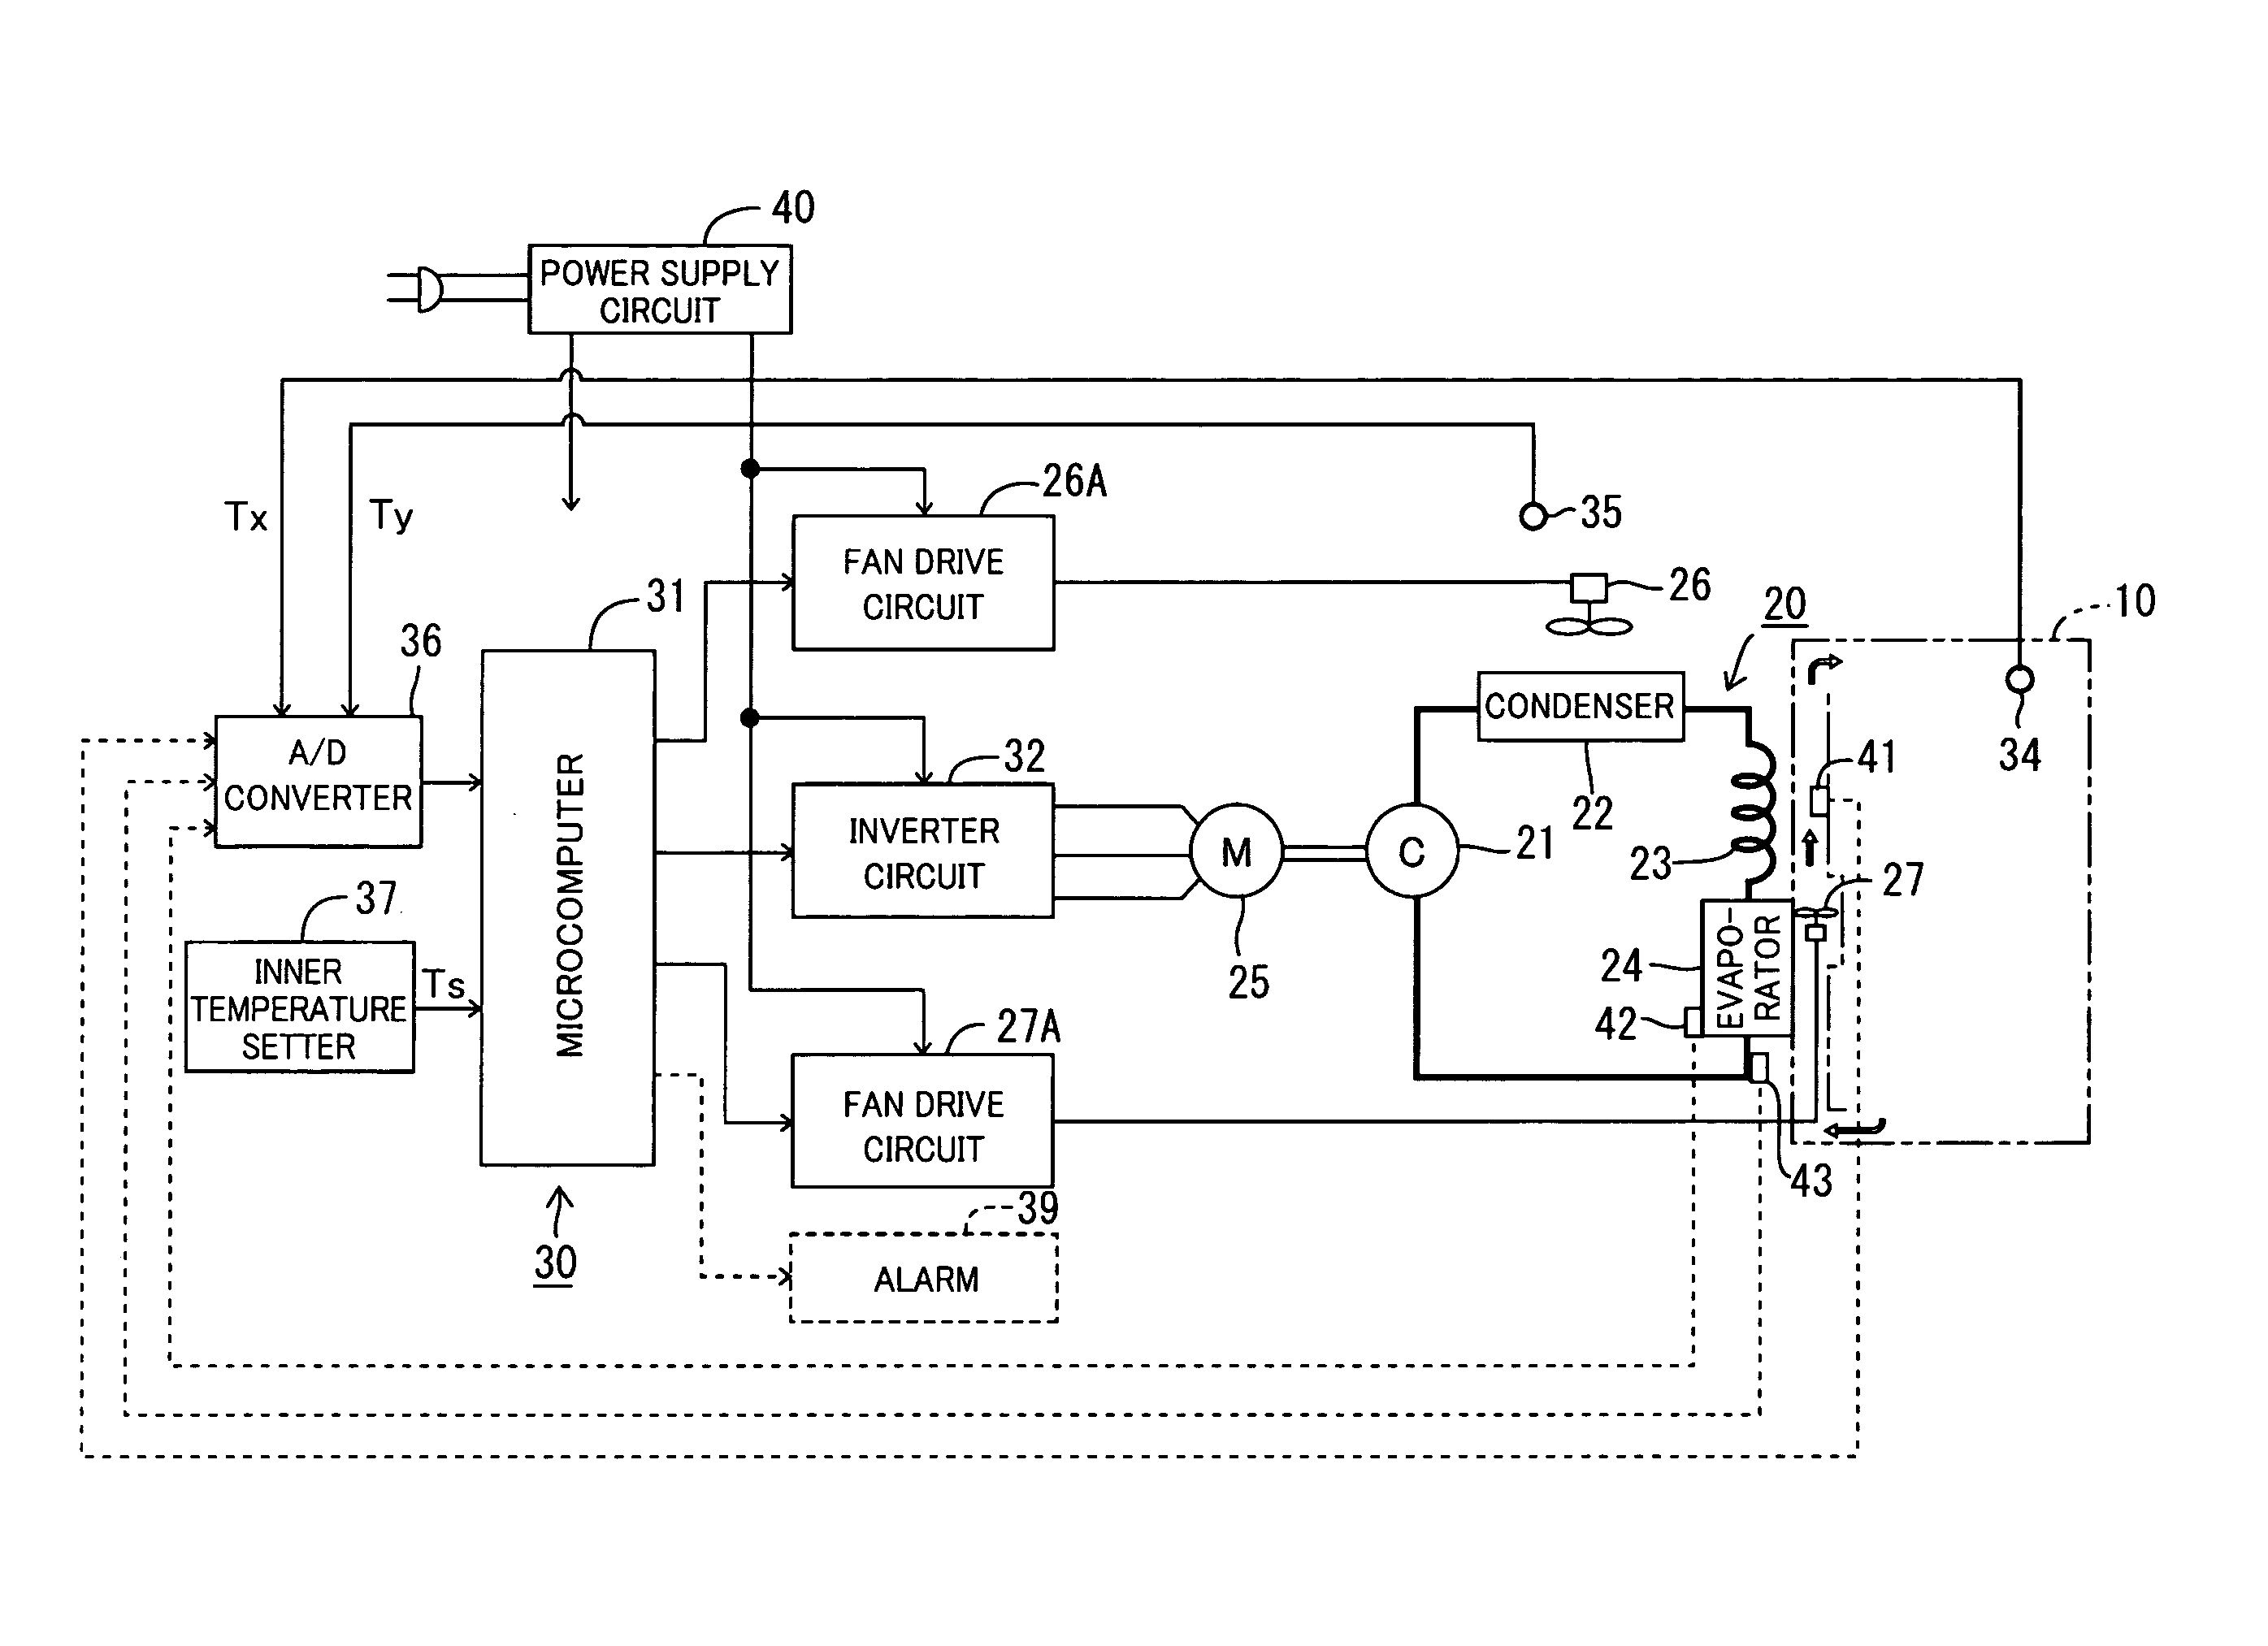 Cooling apparatus having a variable speed compressor with speed limited on the basis of a sensed performance parameter